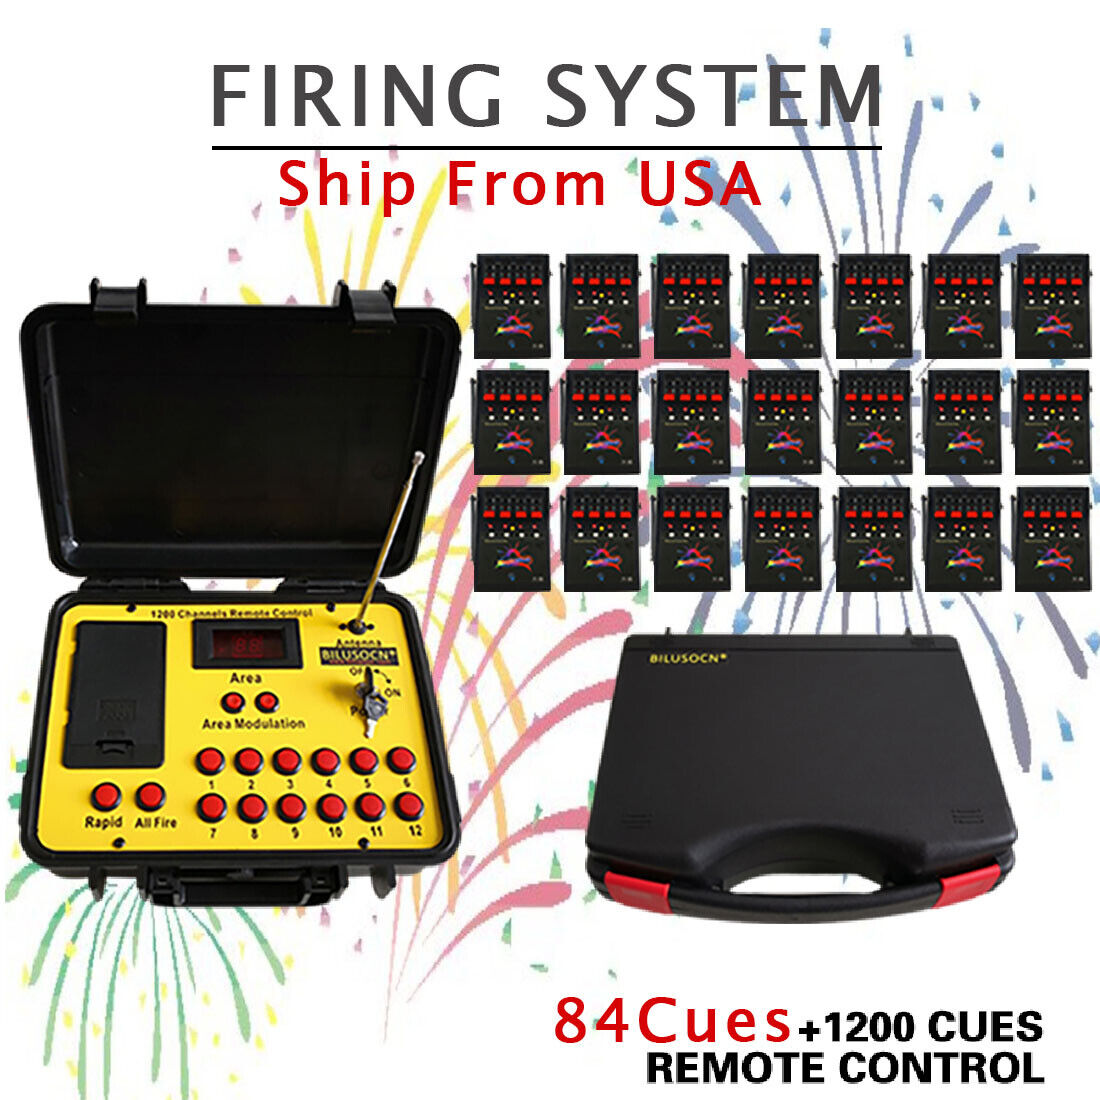 84 Cues fireworks firing system Ship From USA 500M ABS Waterproof Case Control